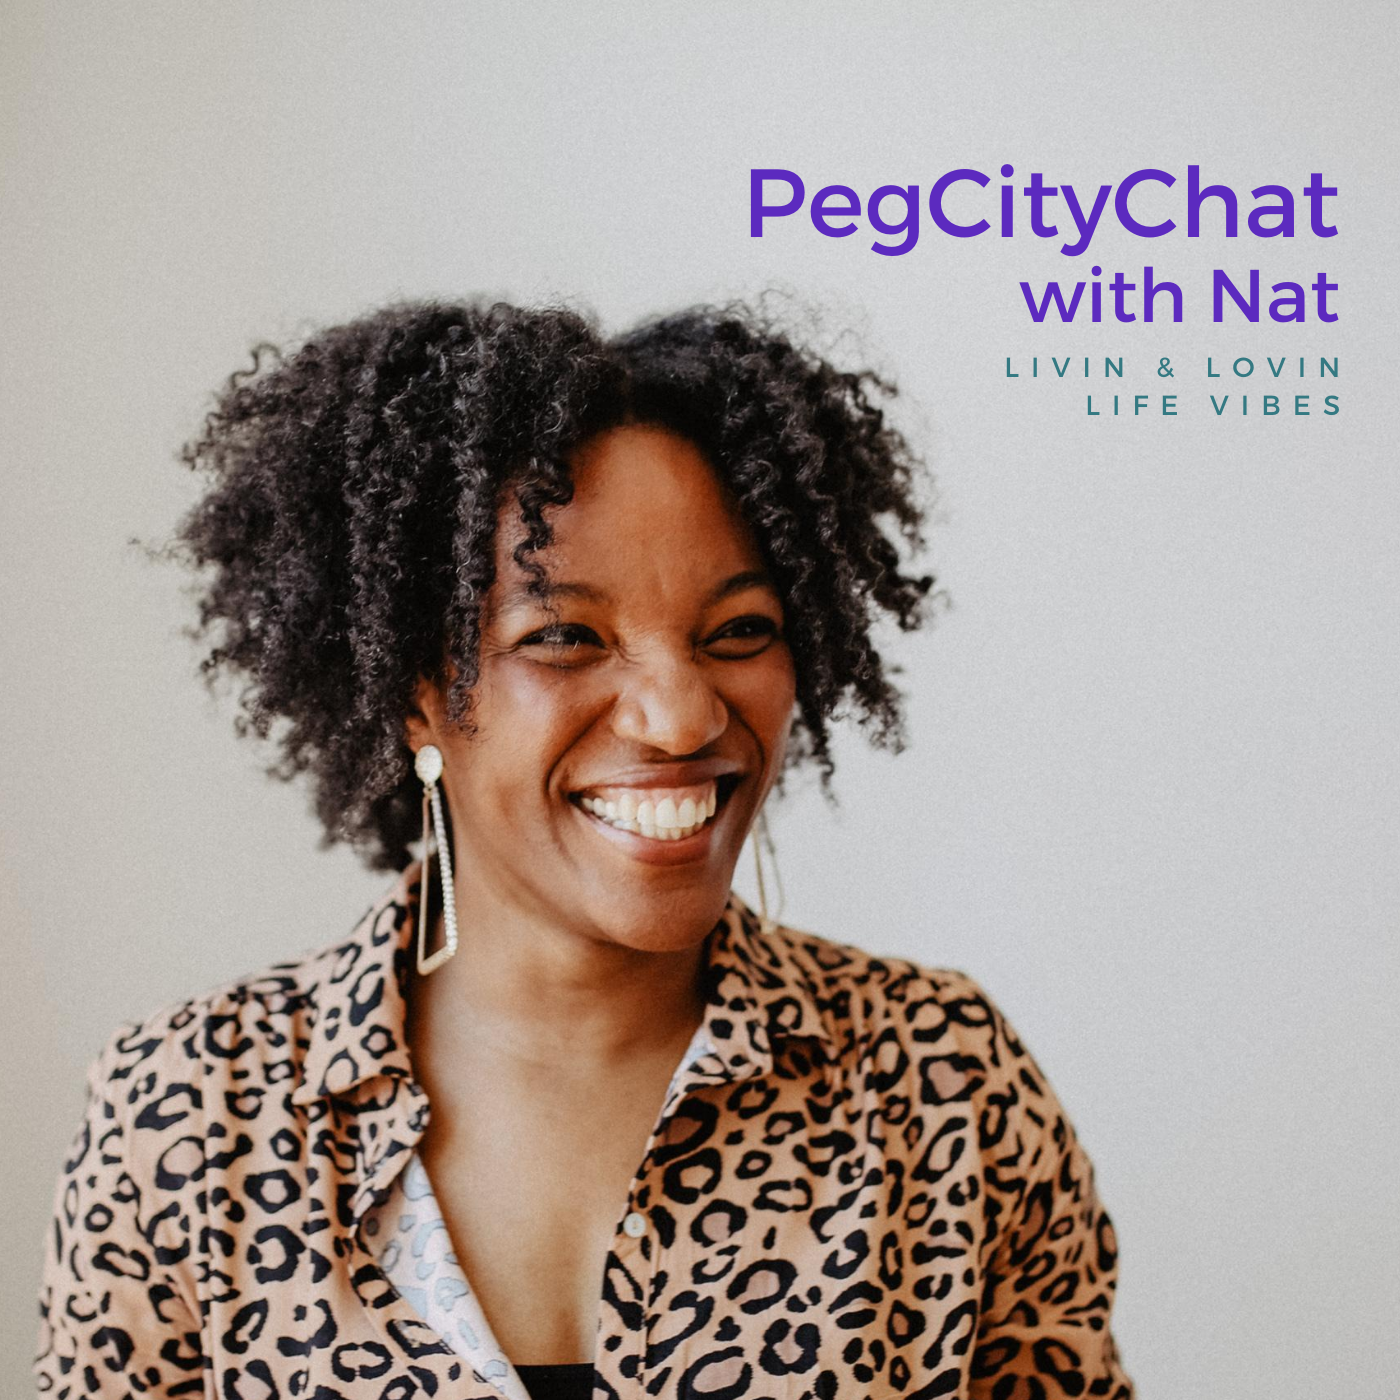 PegCityChat with Nat